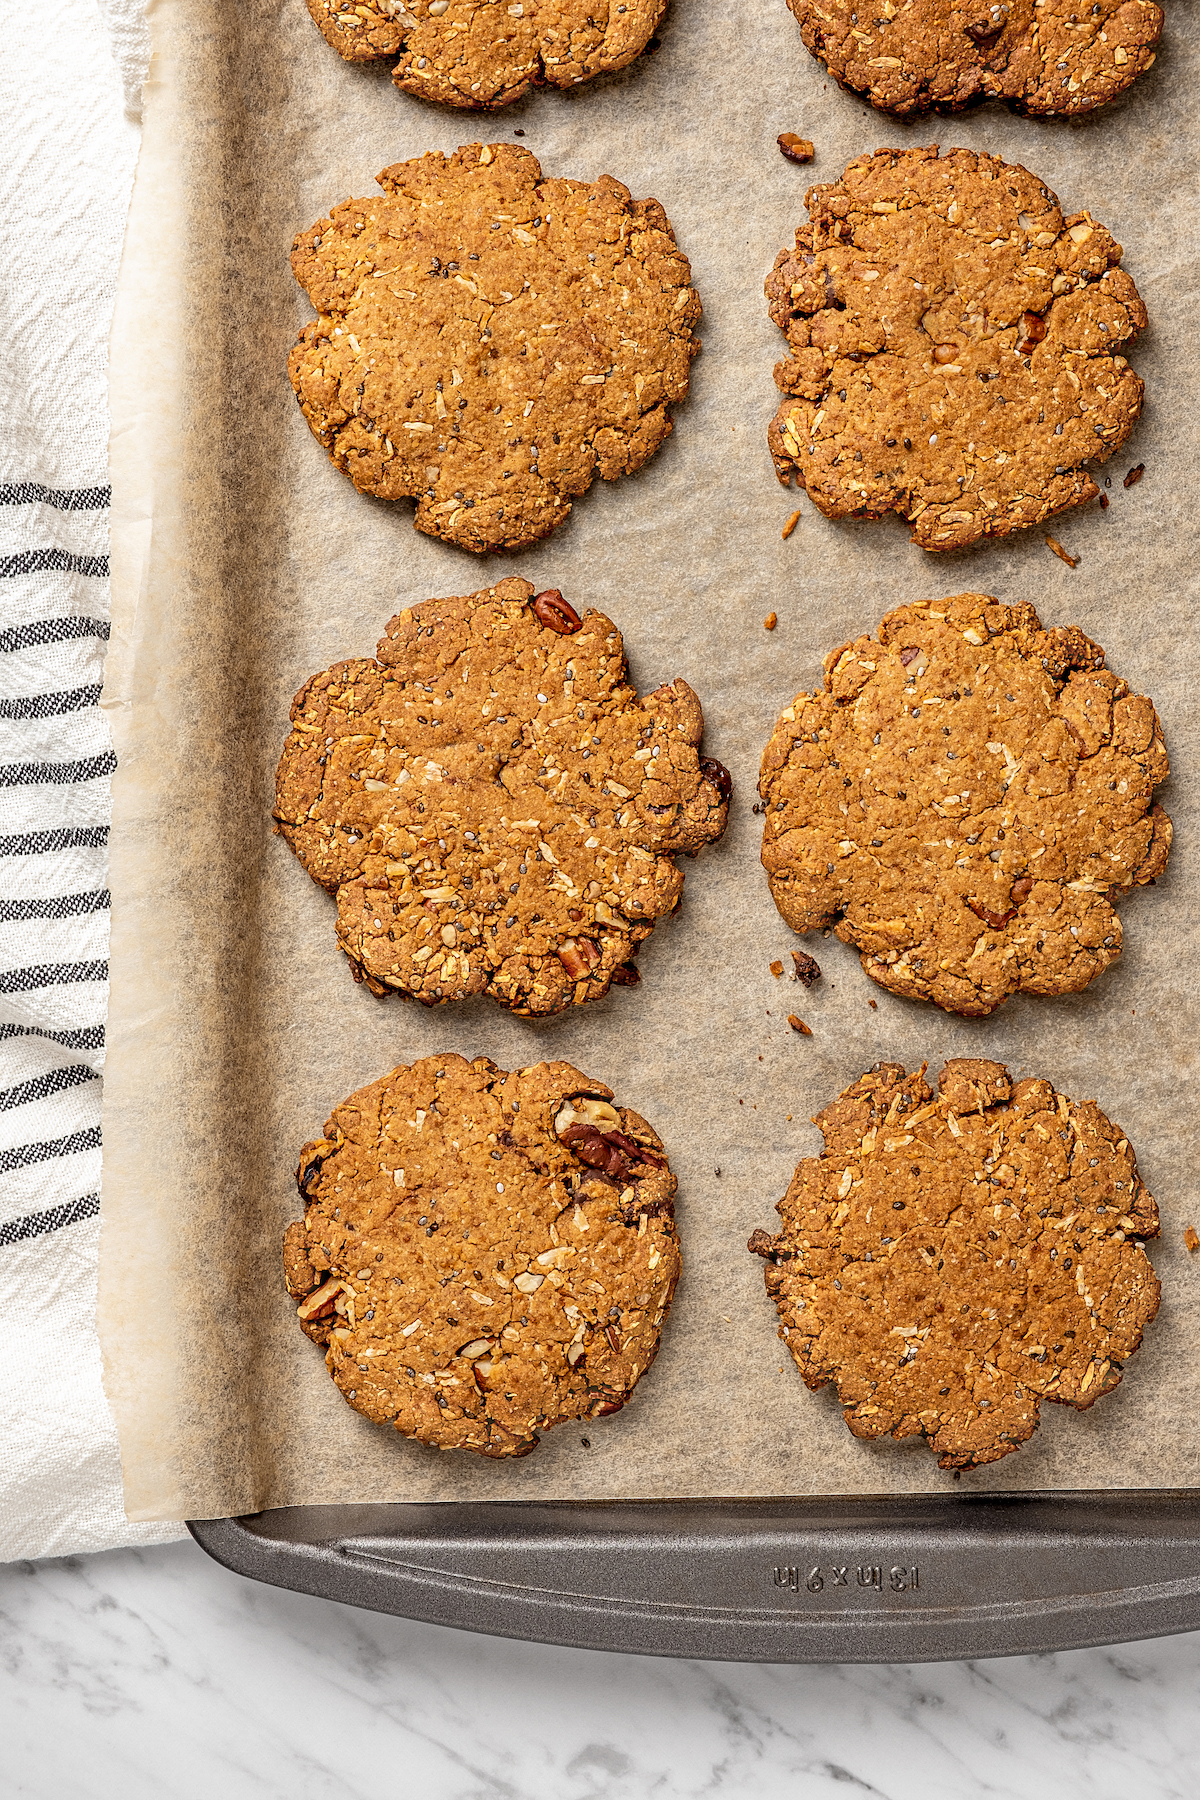 Overhead view of vegan lactation cookies on parchment lined baking sheet